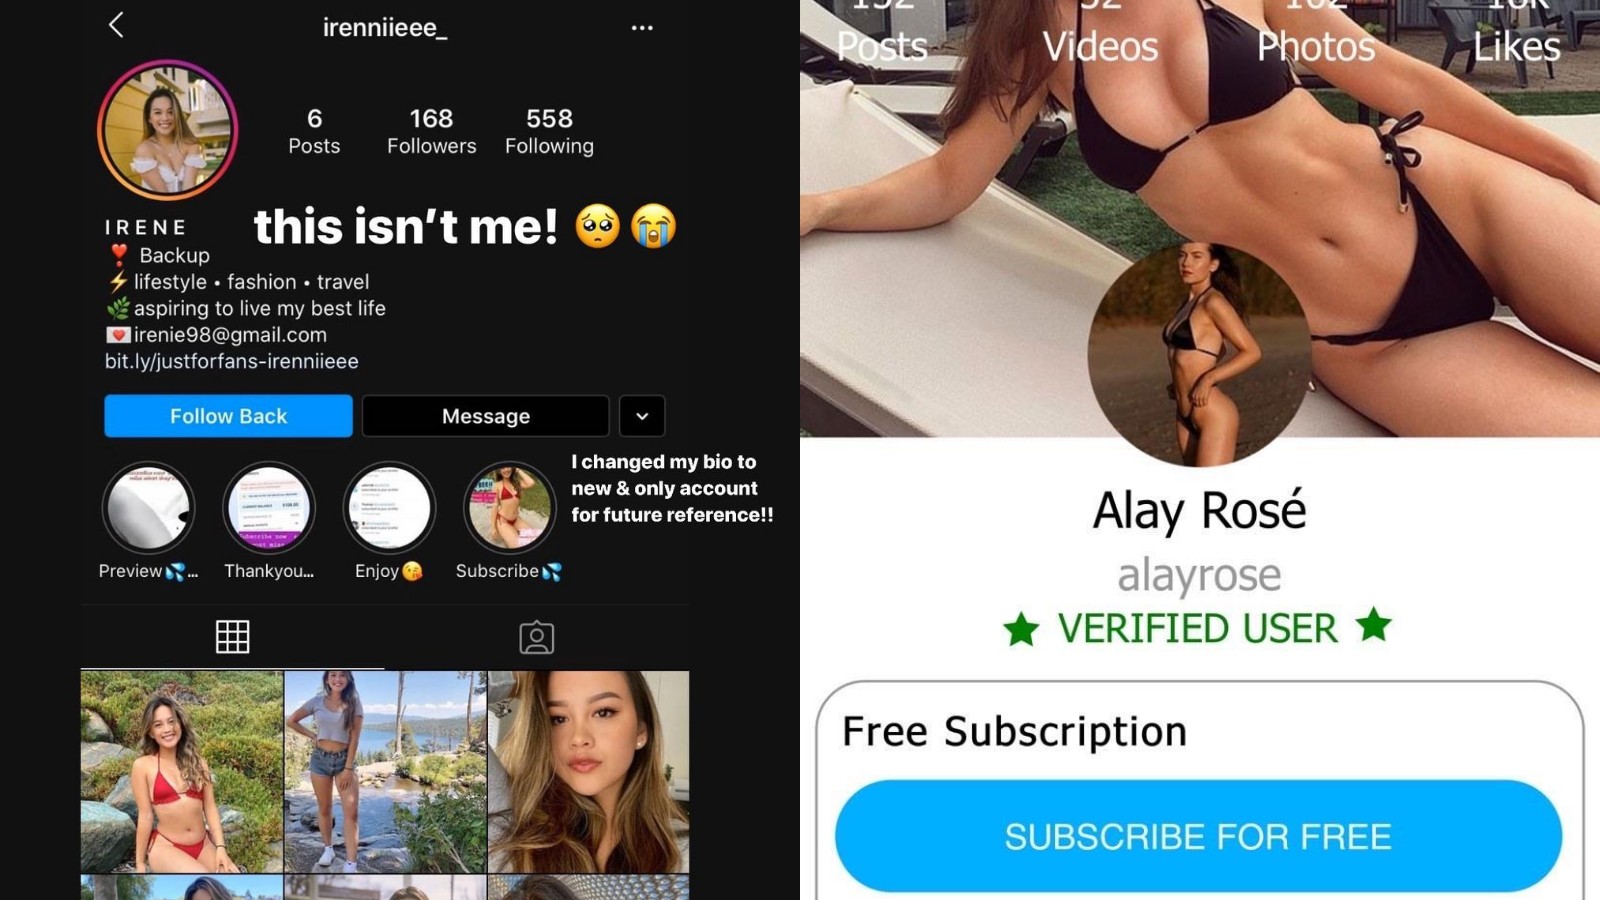 Free Nature Nudists - Young People's Instagram Profiles Are Being Used for Fake Porn Accounts